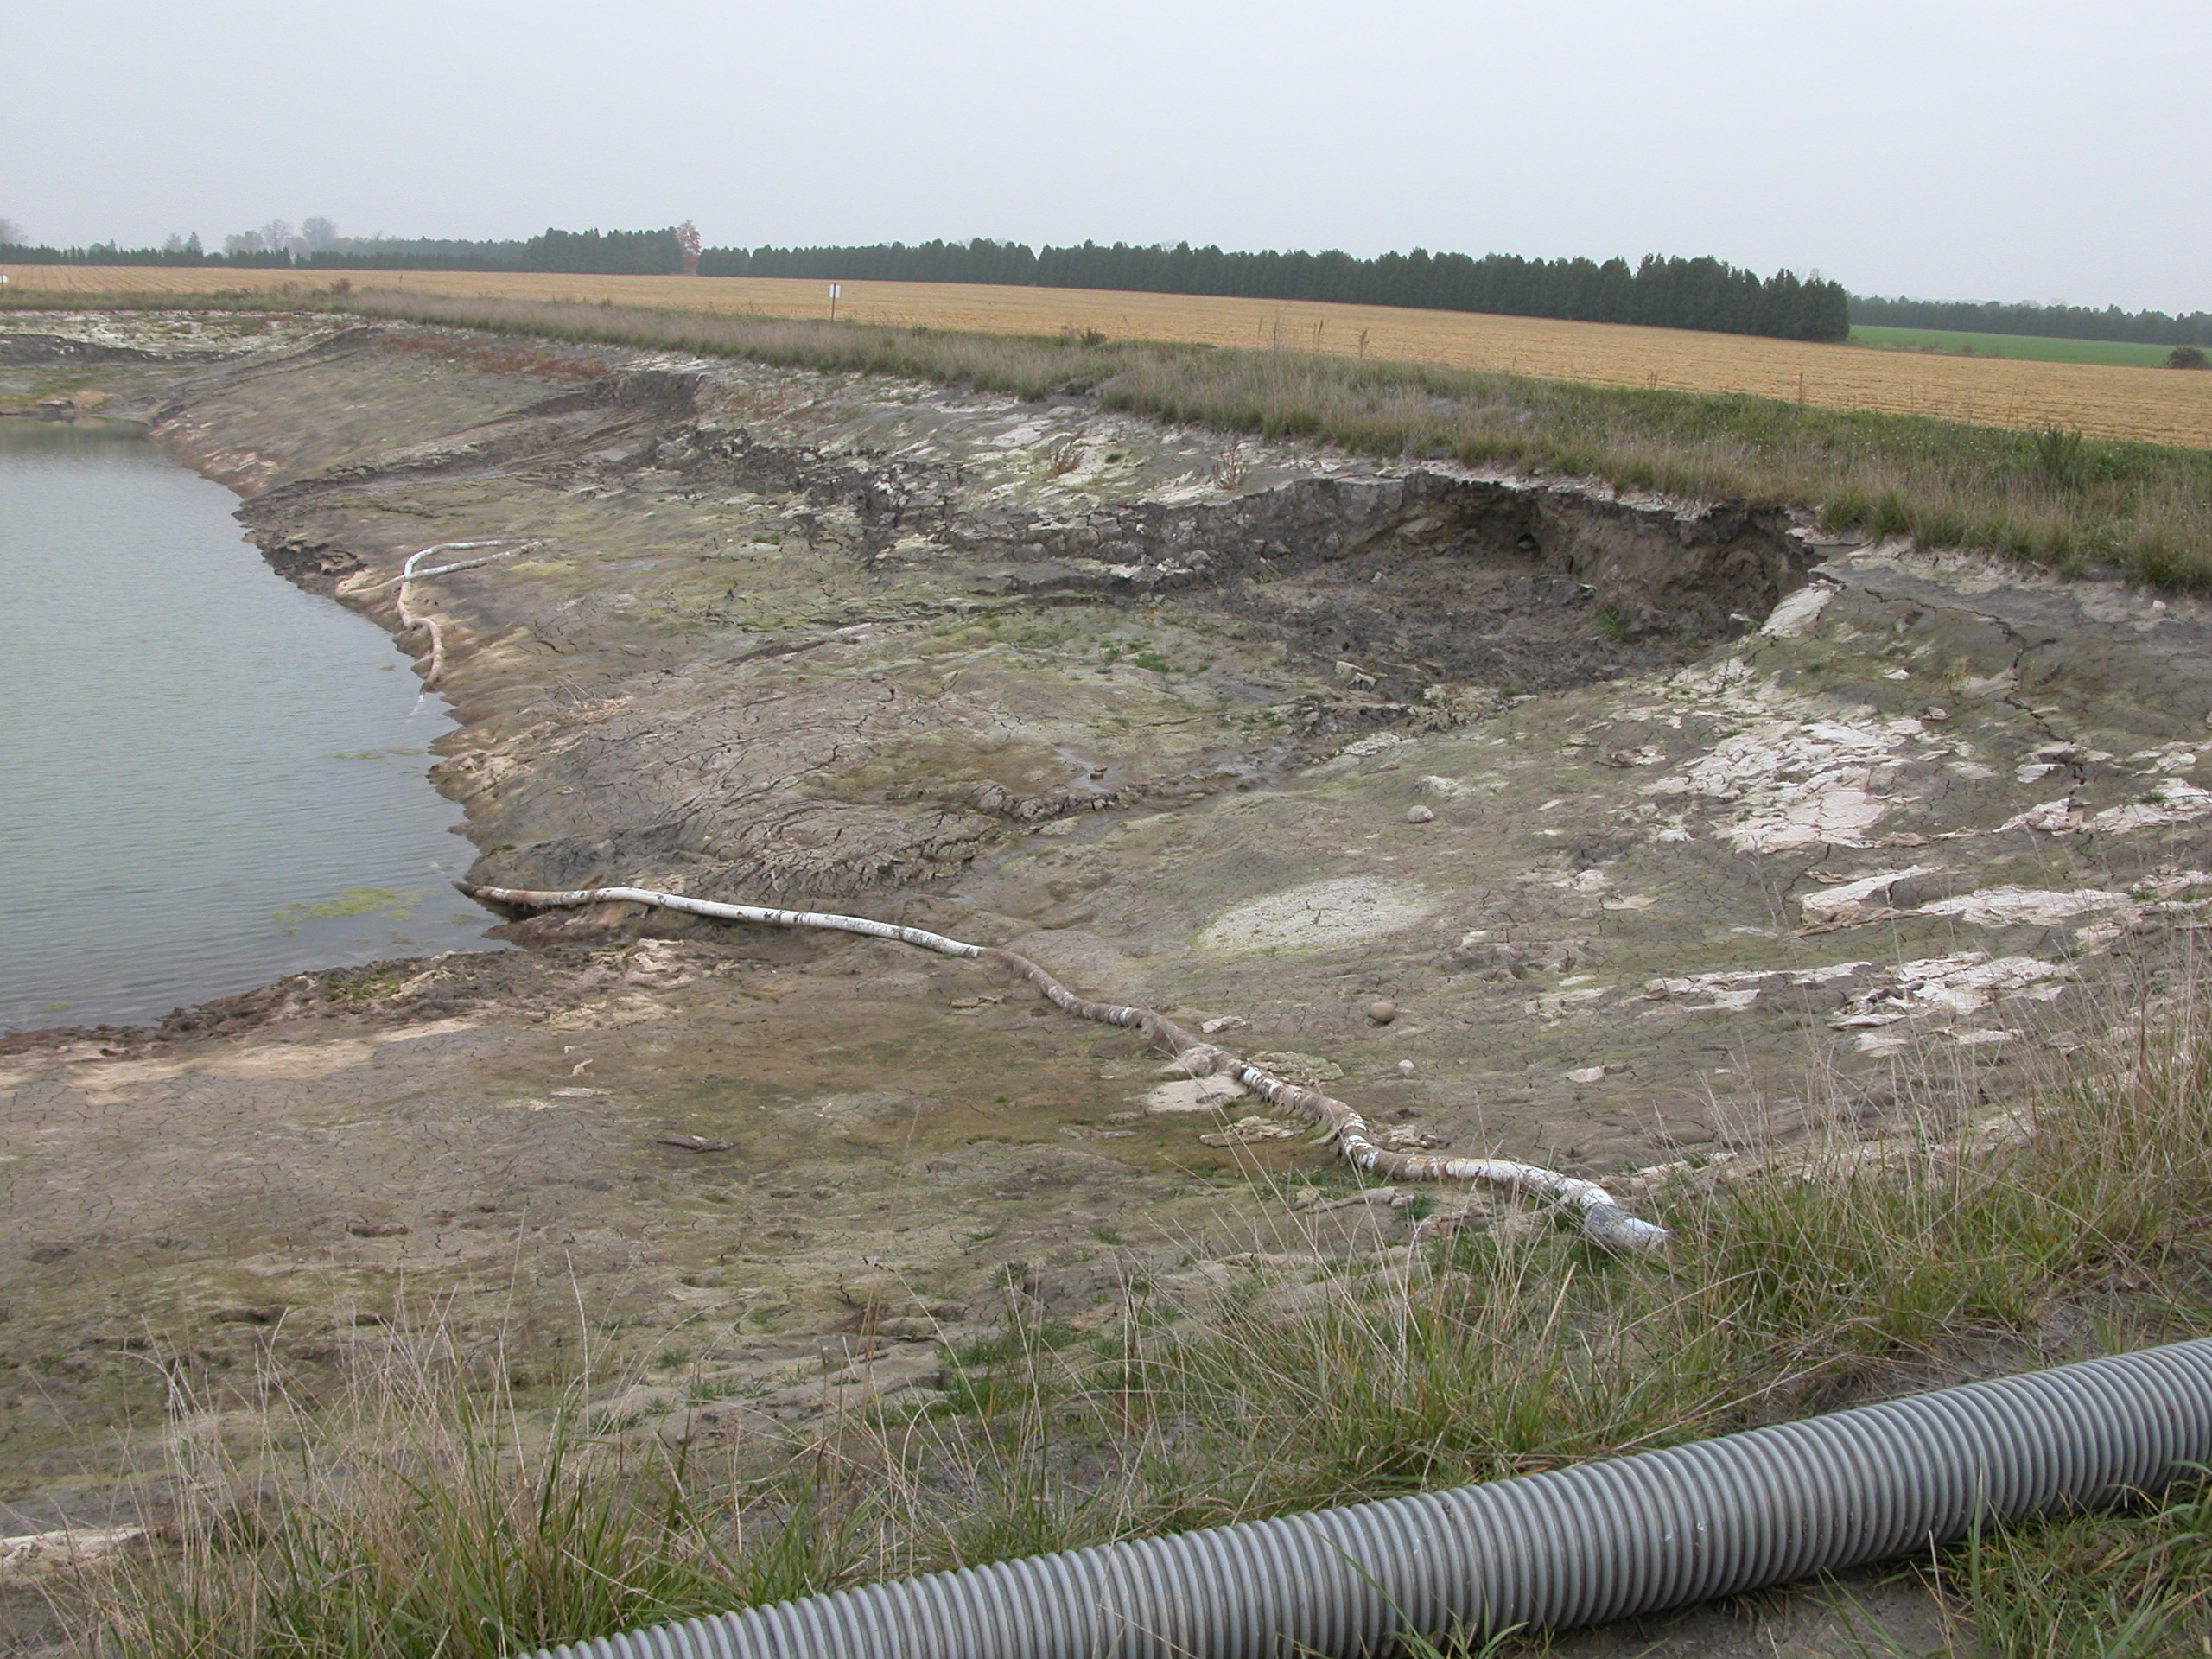 Failure and collapse of the interior bank of the reservoir